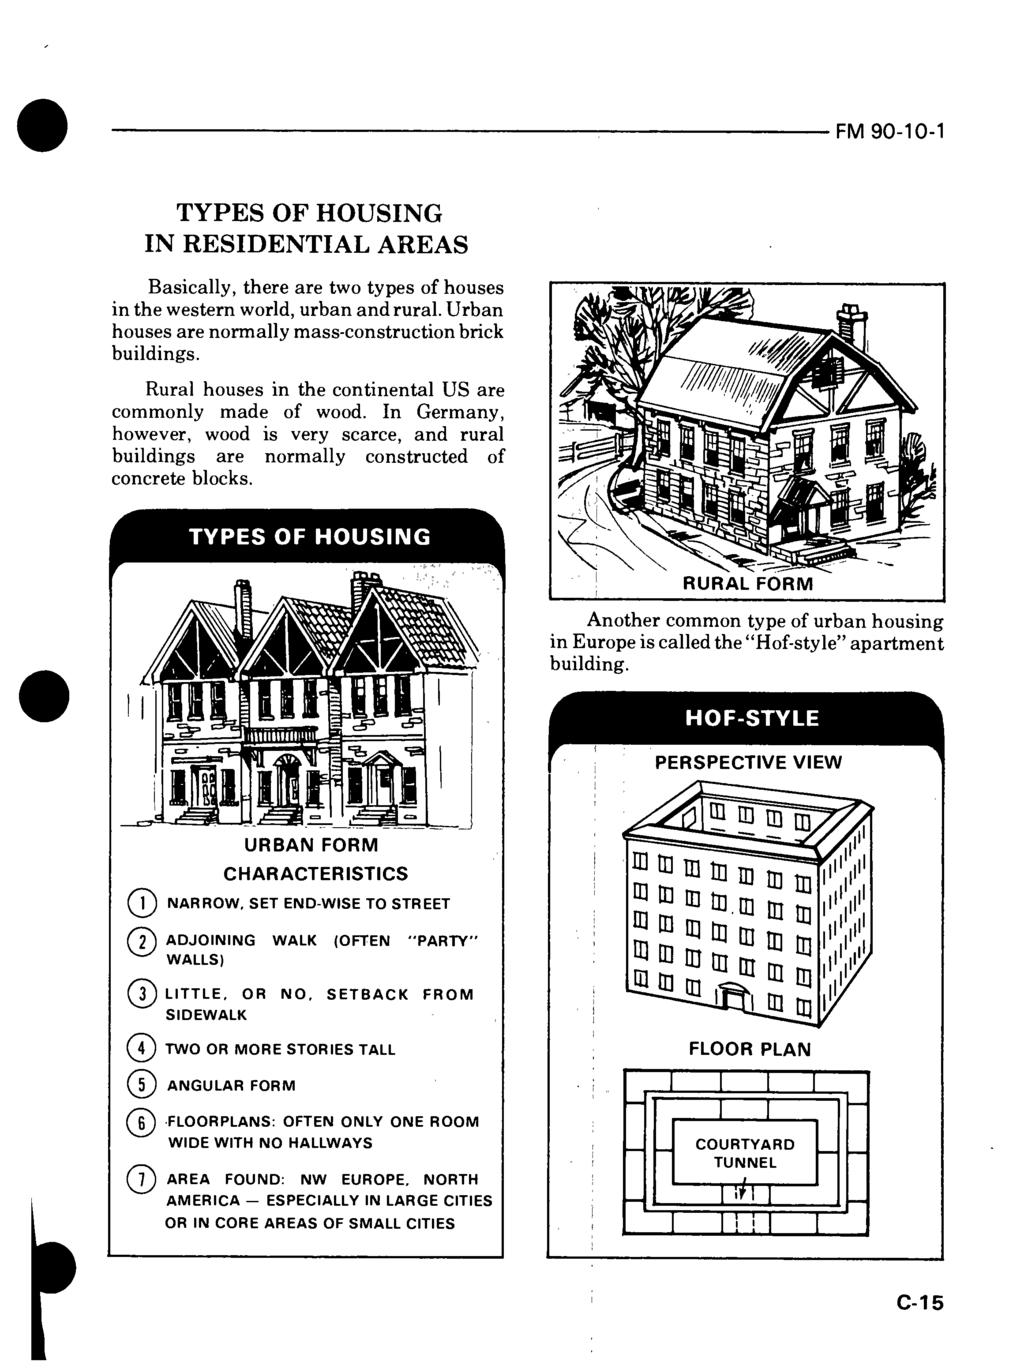 TYPES OF HOUSING IN RESIDENTIAL AREAS Basically, there are two types of houses in the western world, urban and rural. Urban houses are normally mass-construction brick buildings.